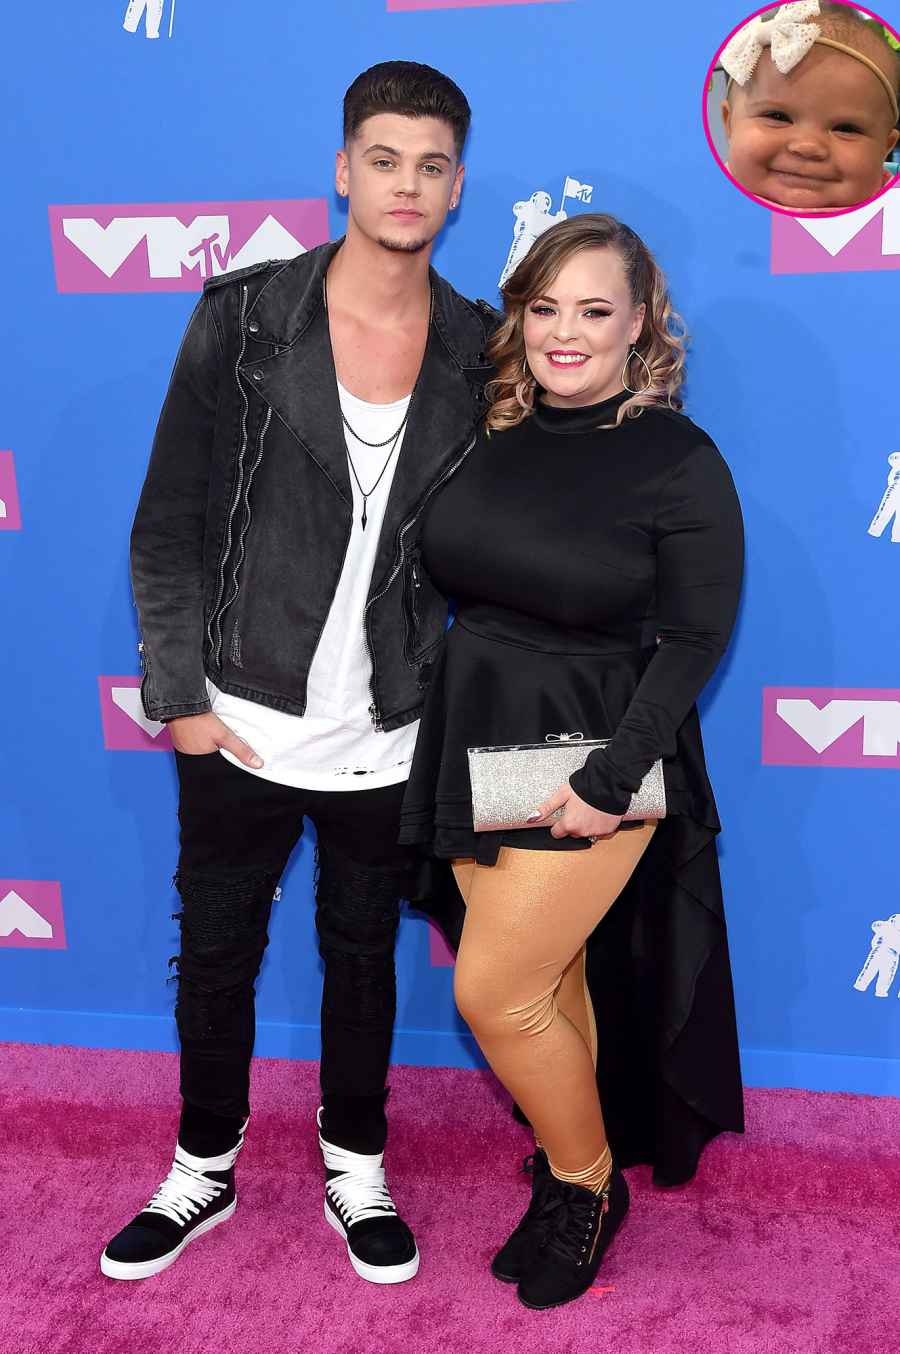 Tyler Baltierra and Catelynn Lowell and Vaeda Moms Know Best